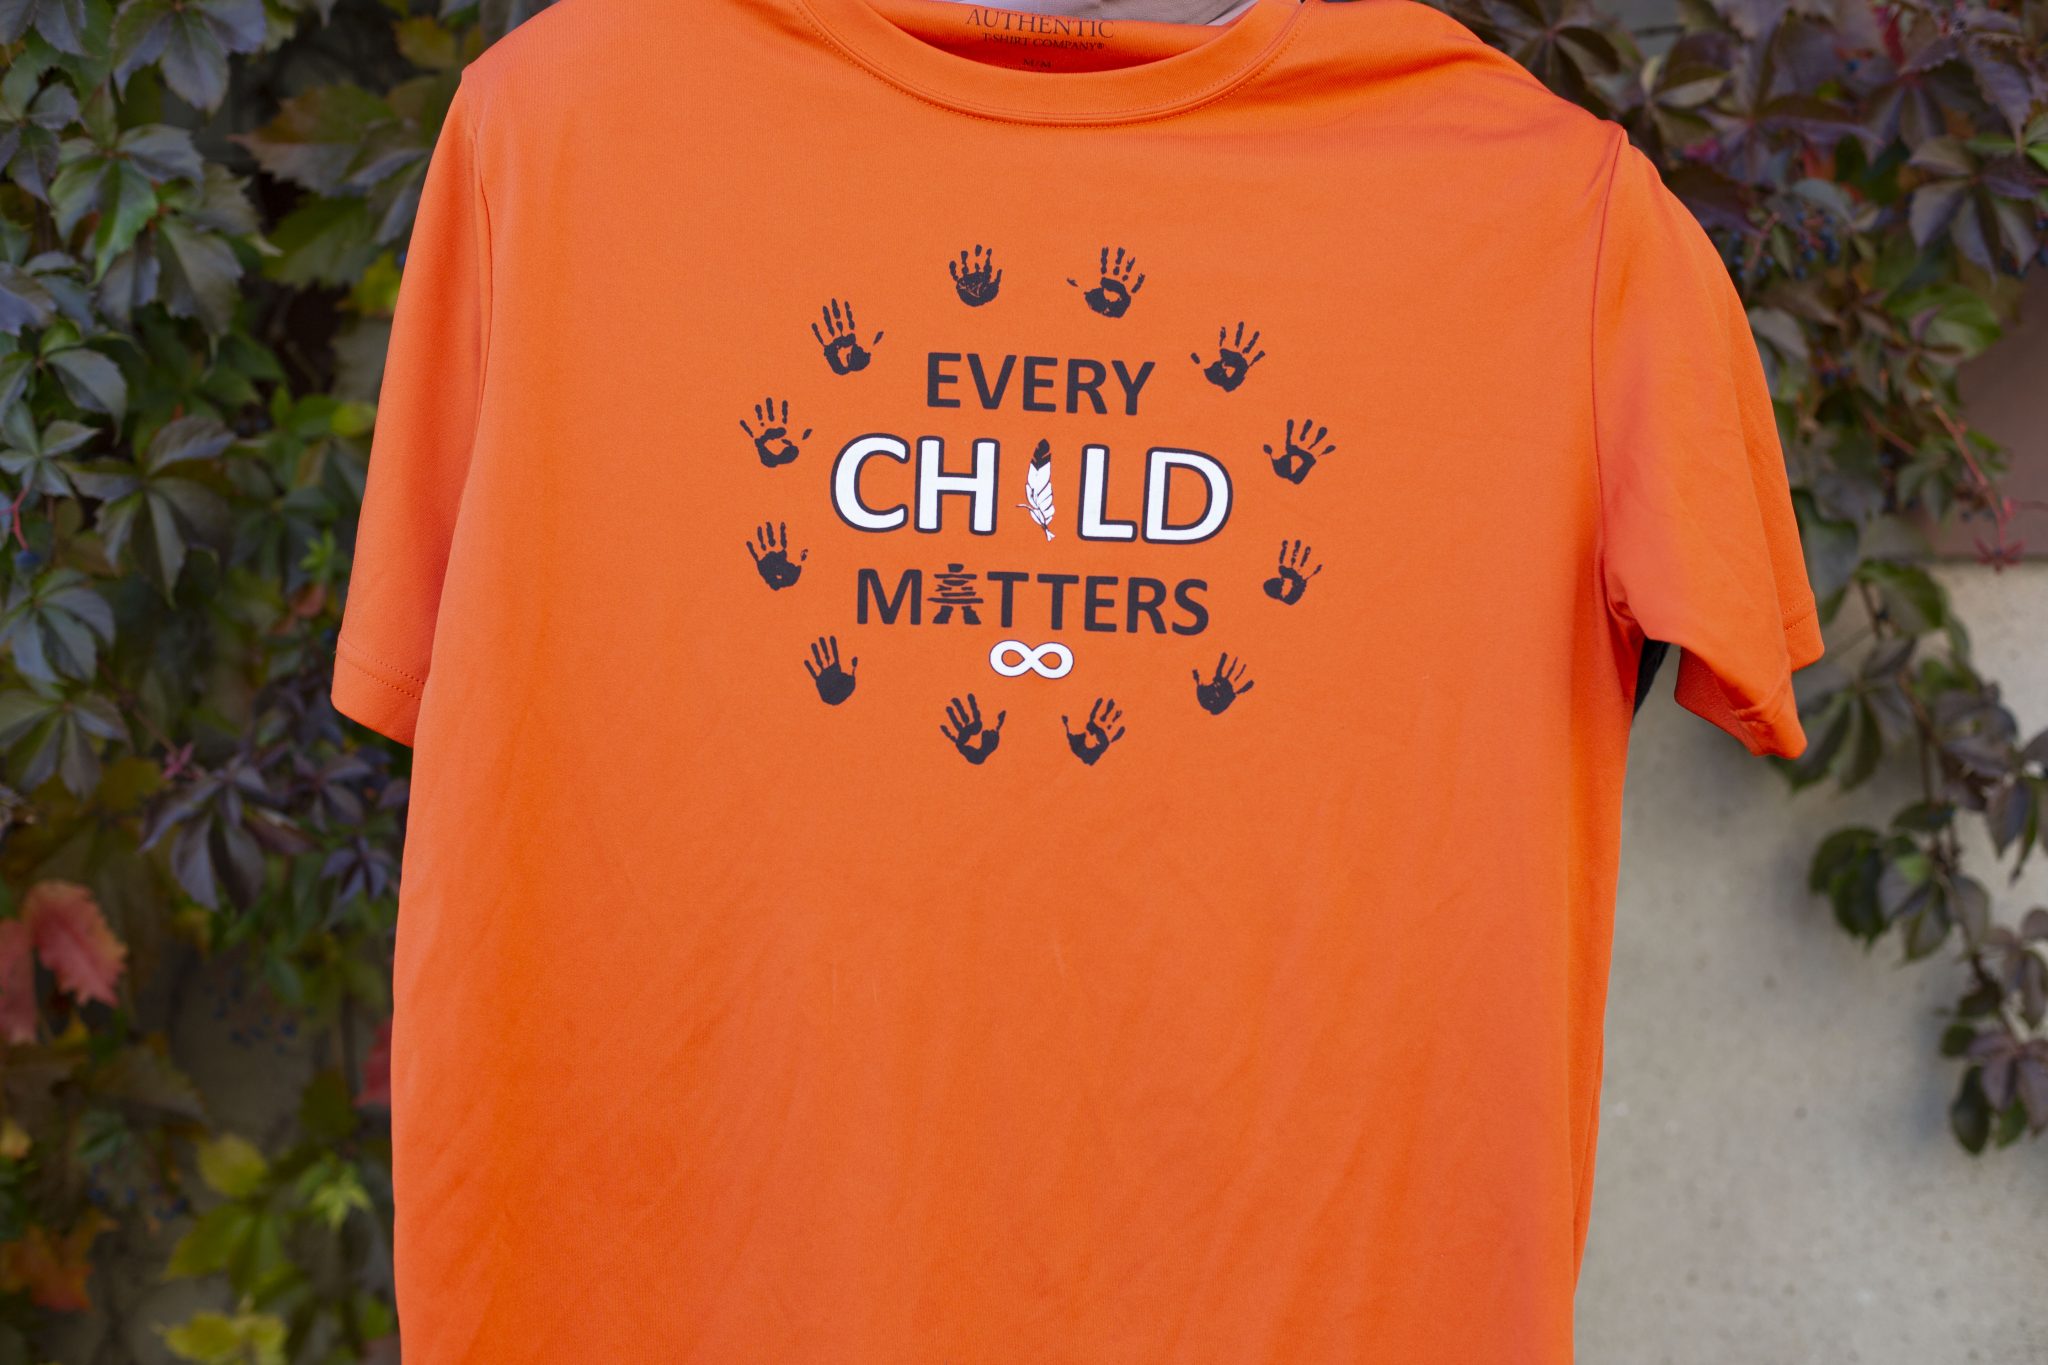 Organge shirt with the words "Every child matters" for the National Day for Truth and Reconciliation